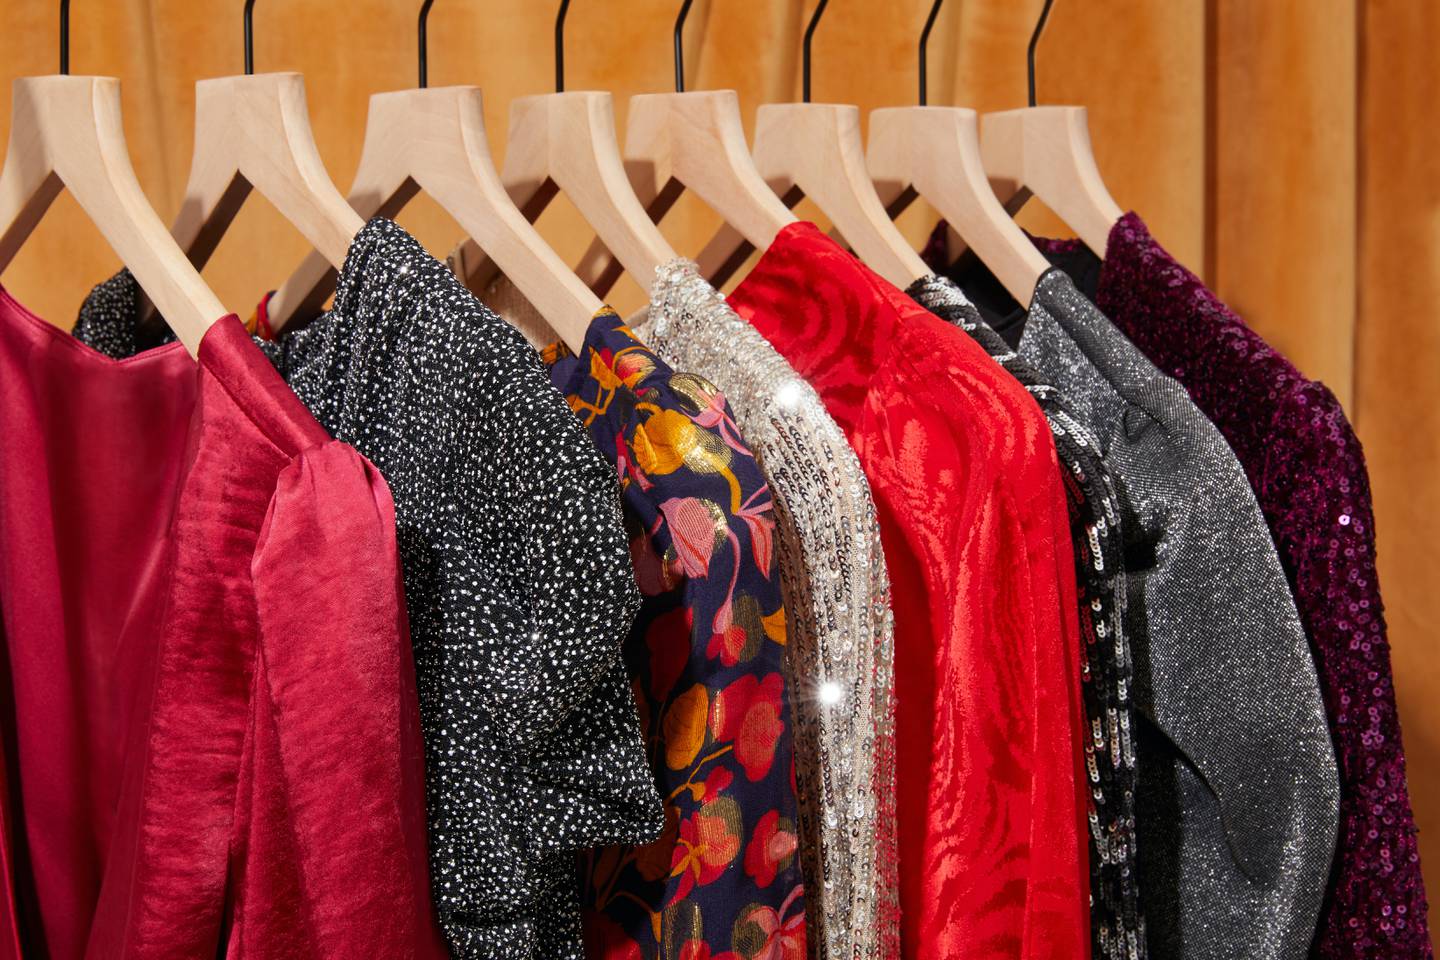 A rack of clothing, including red, floral pattern and sequin dresses.